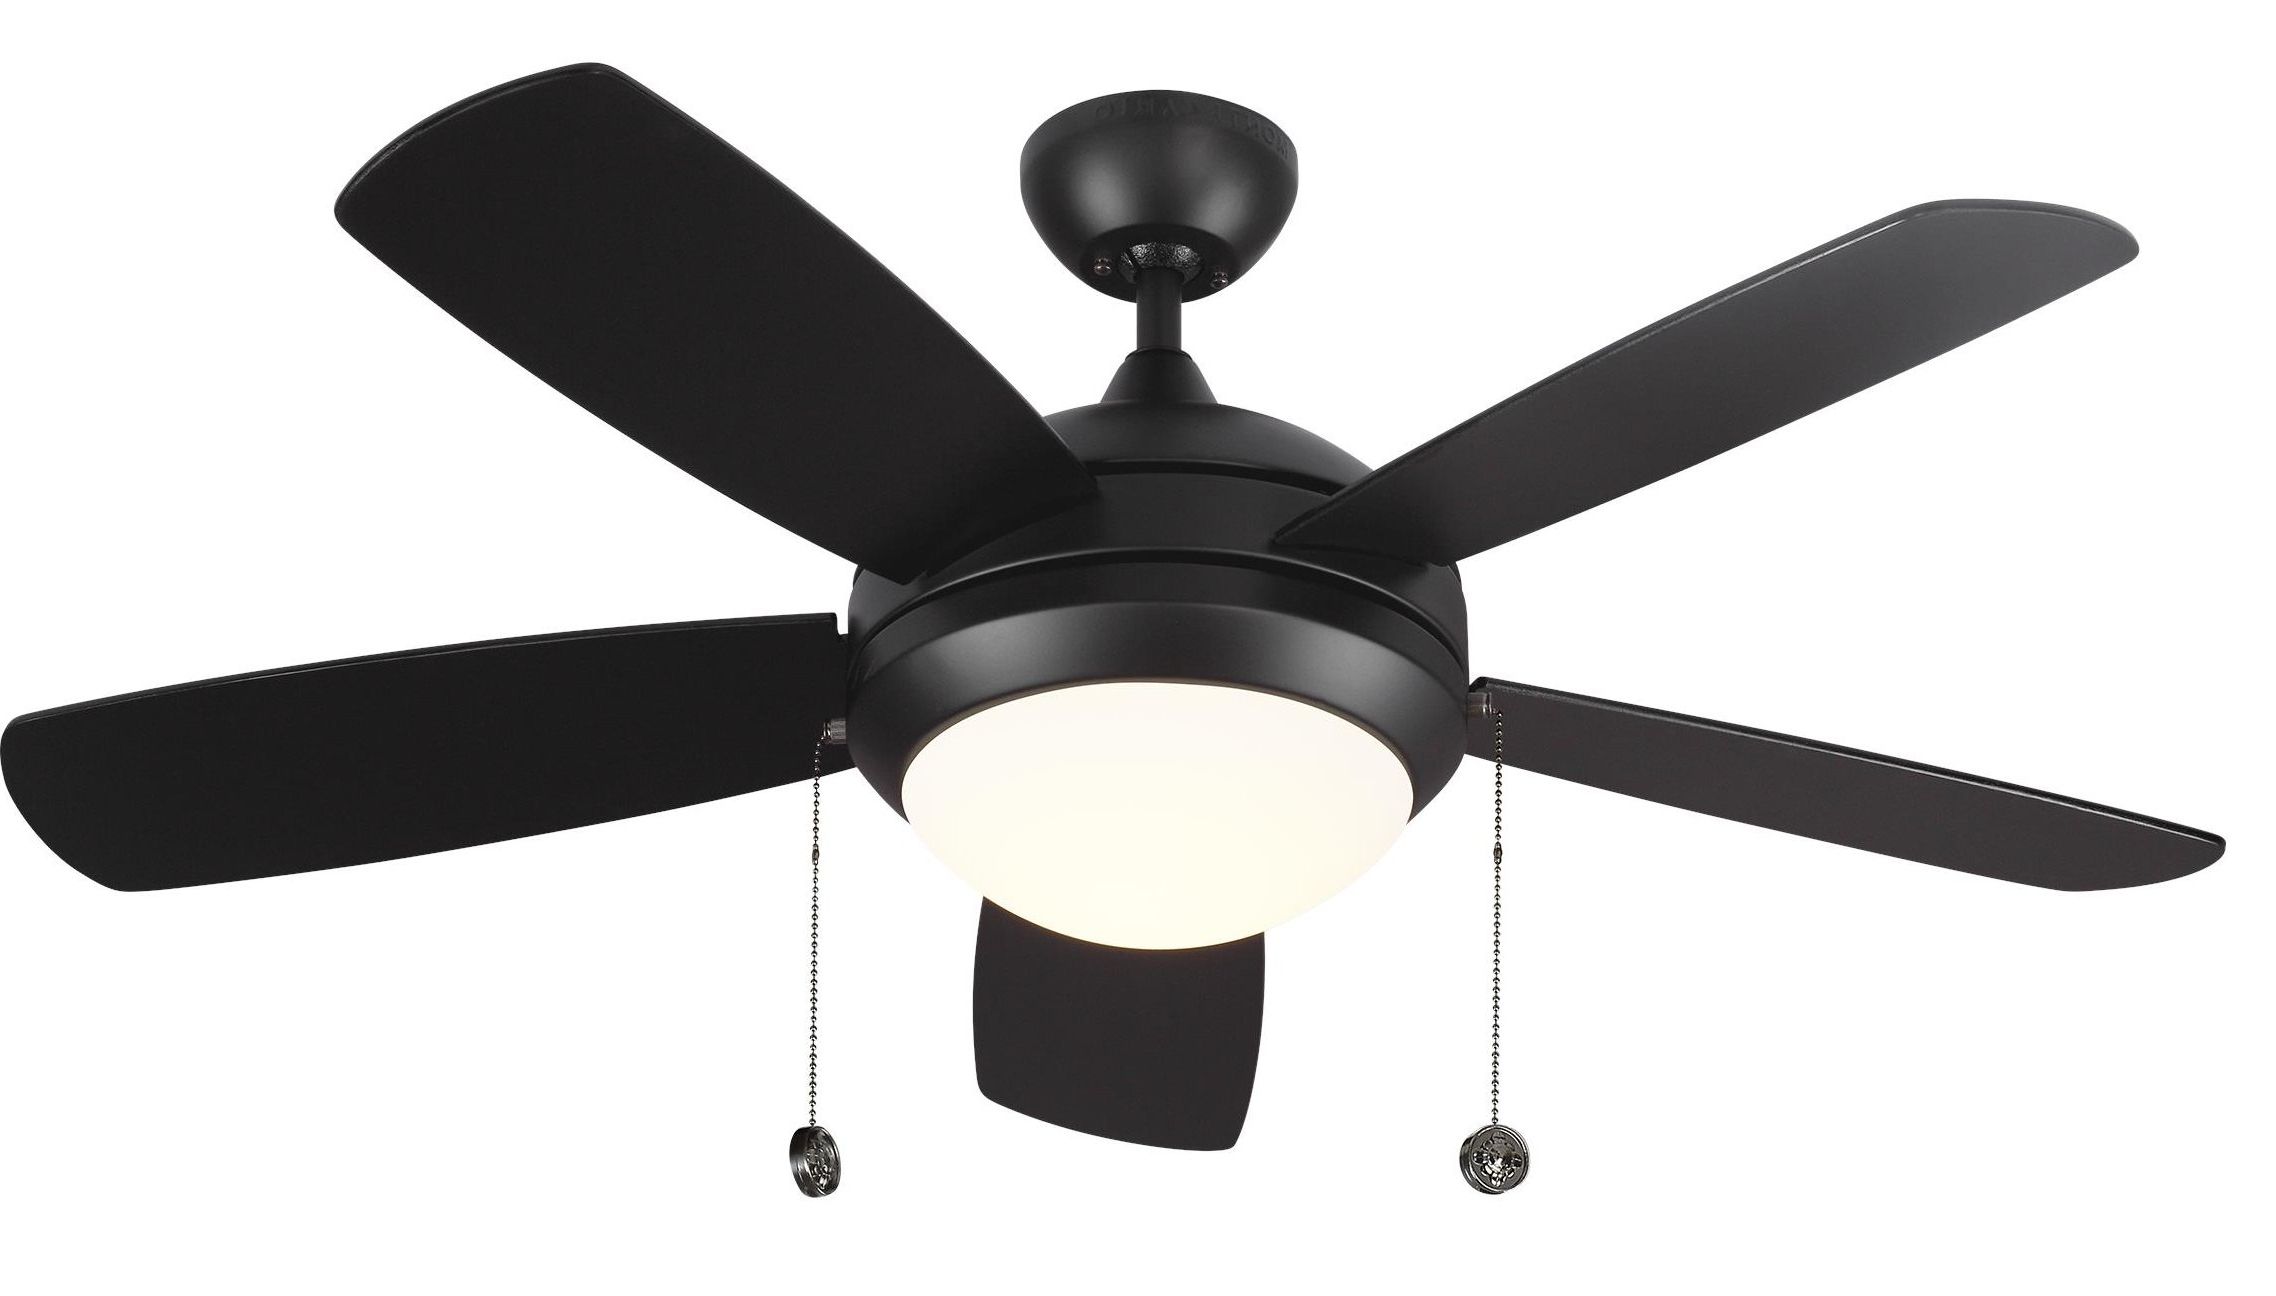 44" Lolington 5 Blade Led Ceiling Fan With Regard To 2019 Sudie 5 Blade Led Ceiling Fans (View 5 of 20)